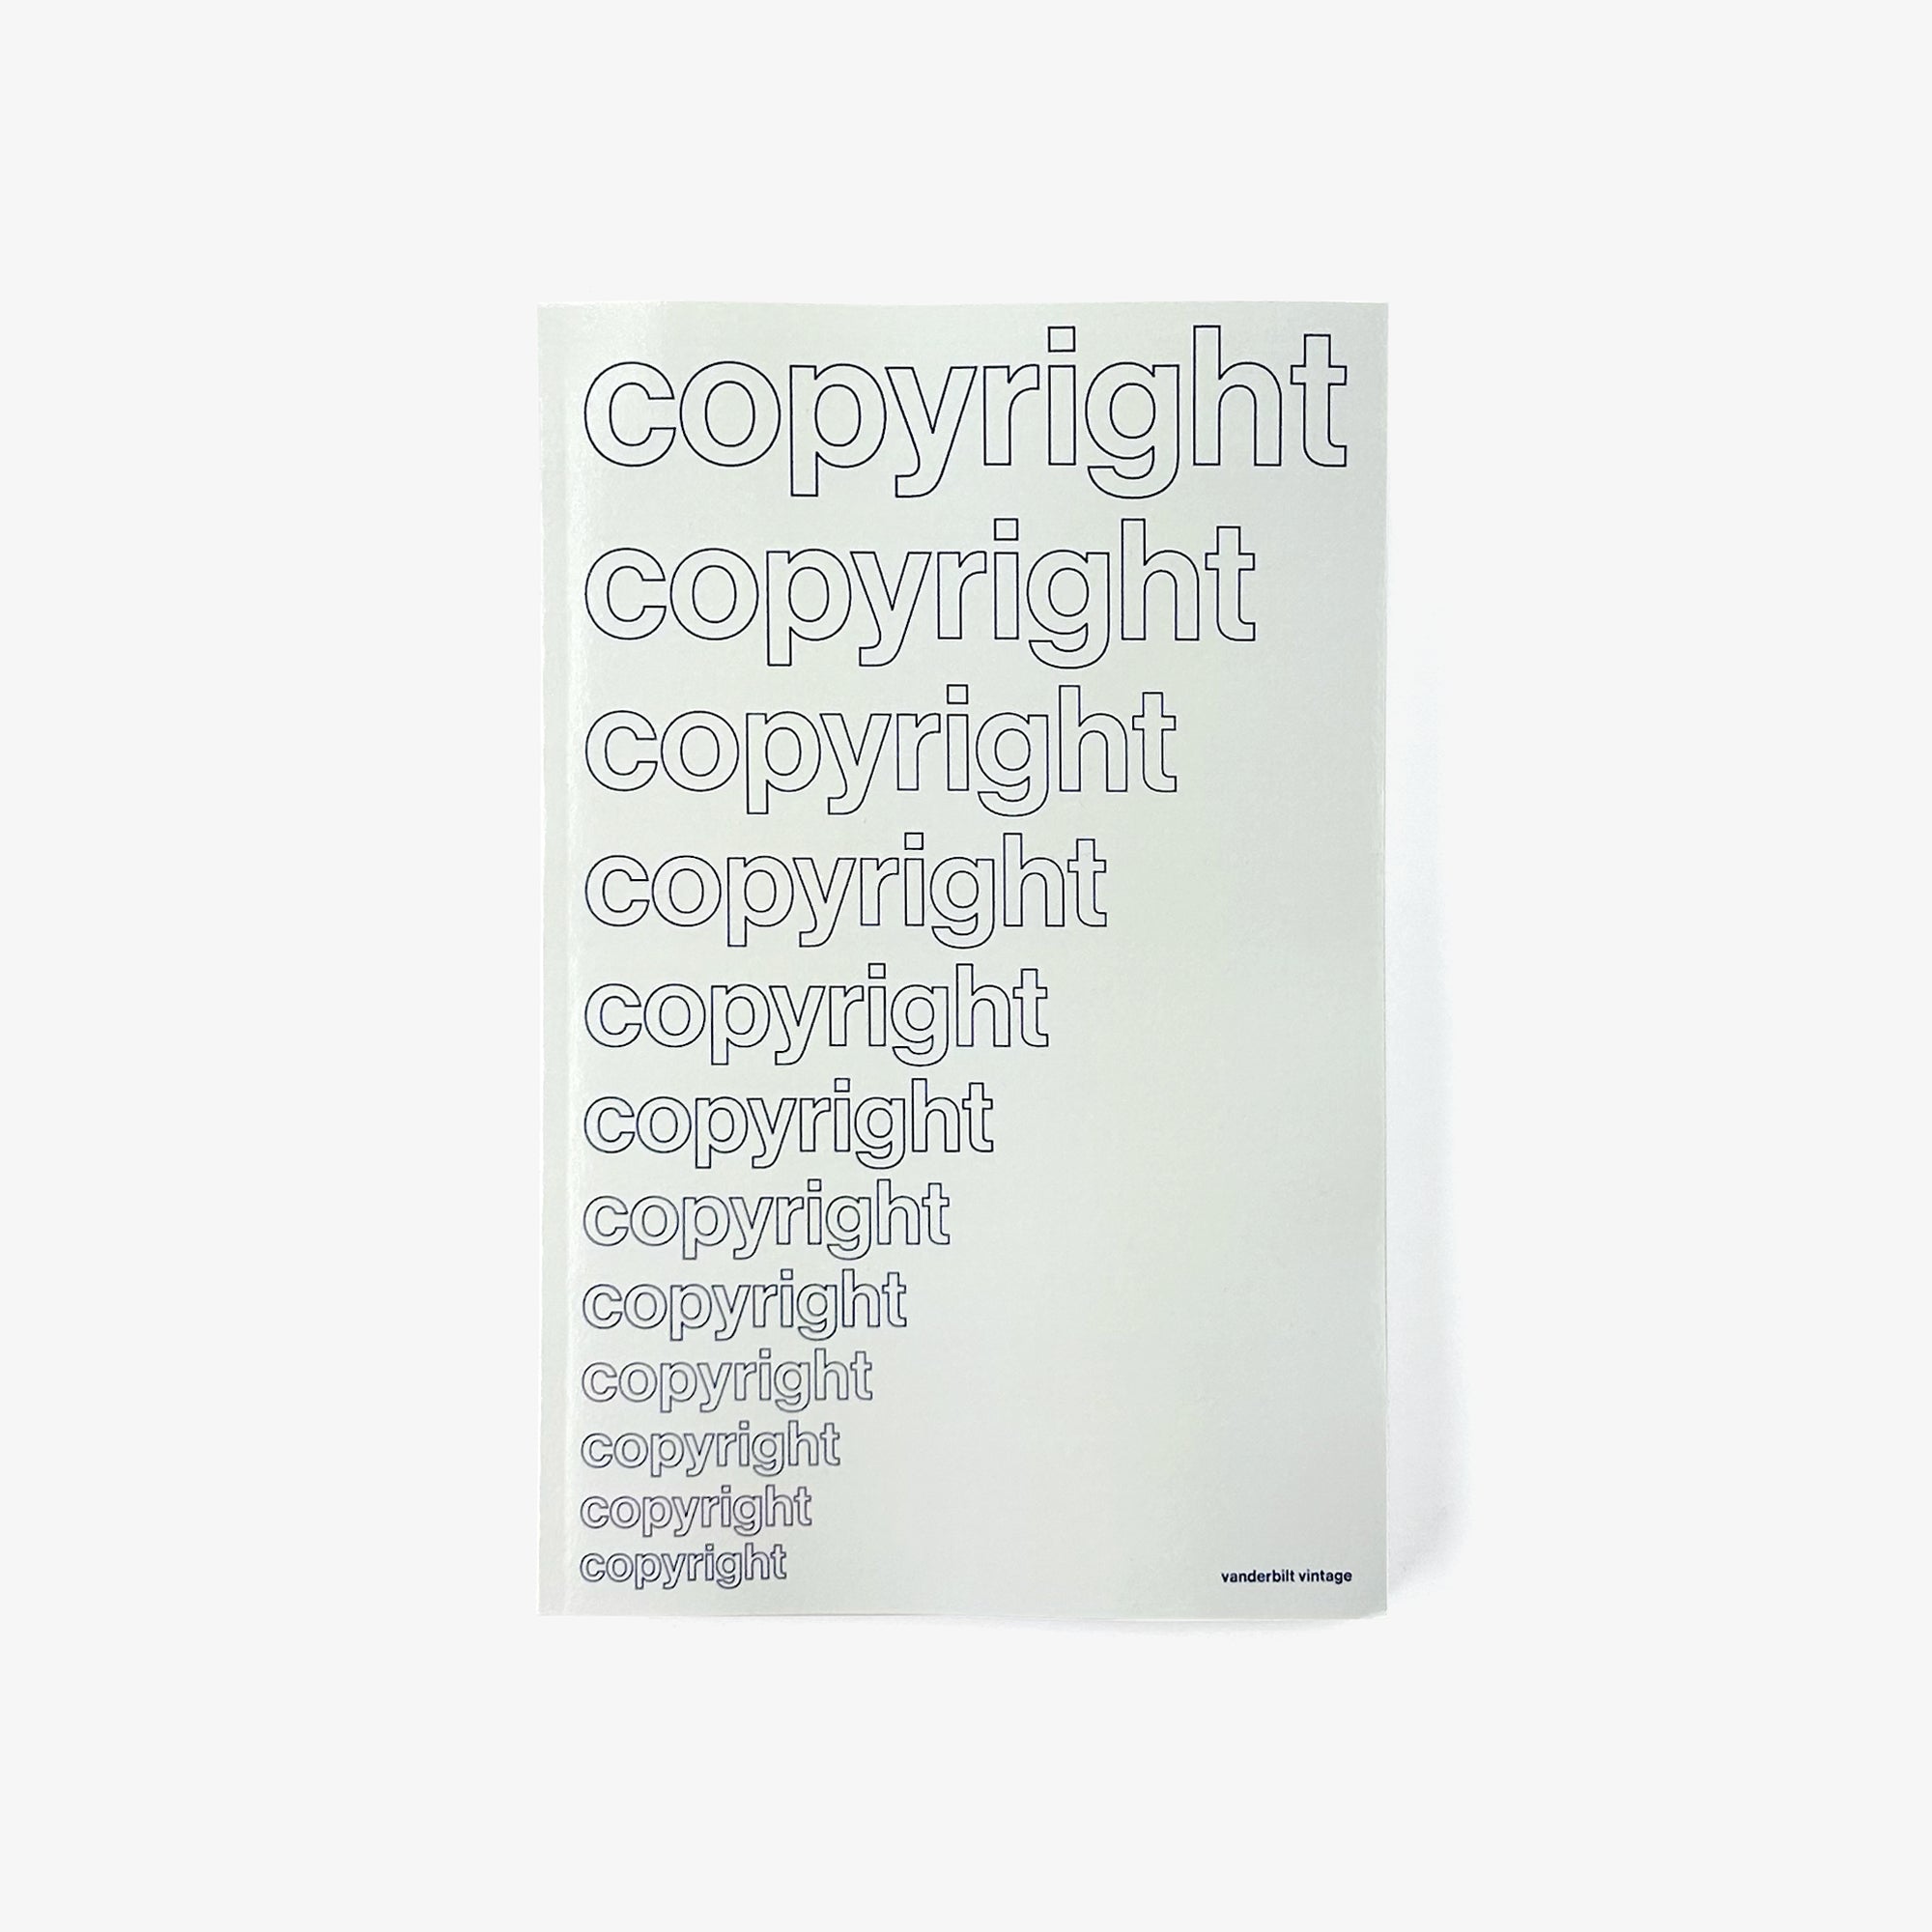 Copyright in Historical Perspective